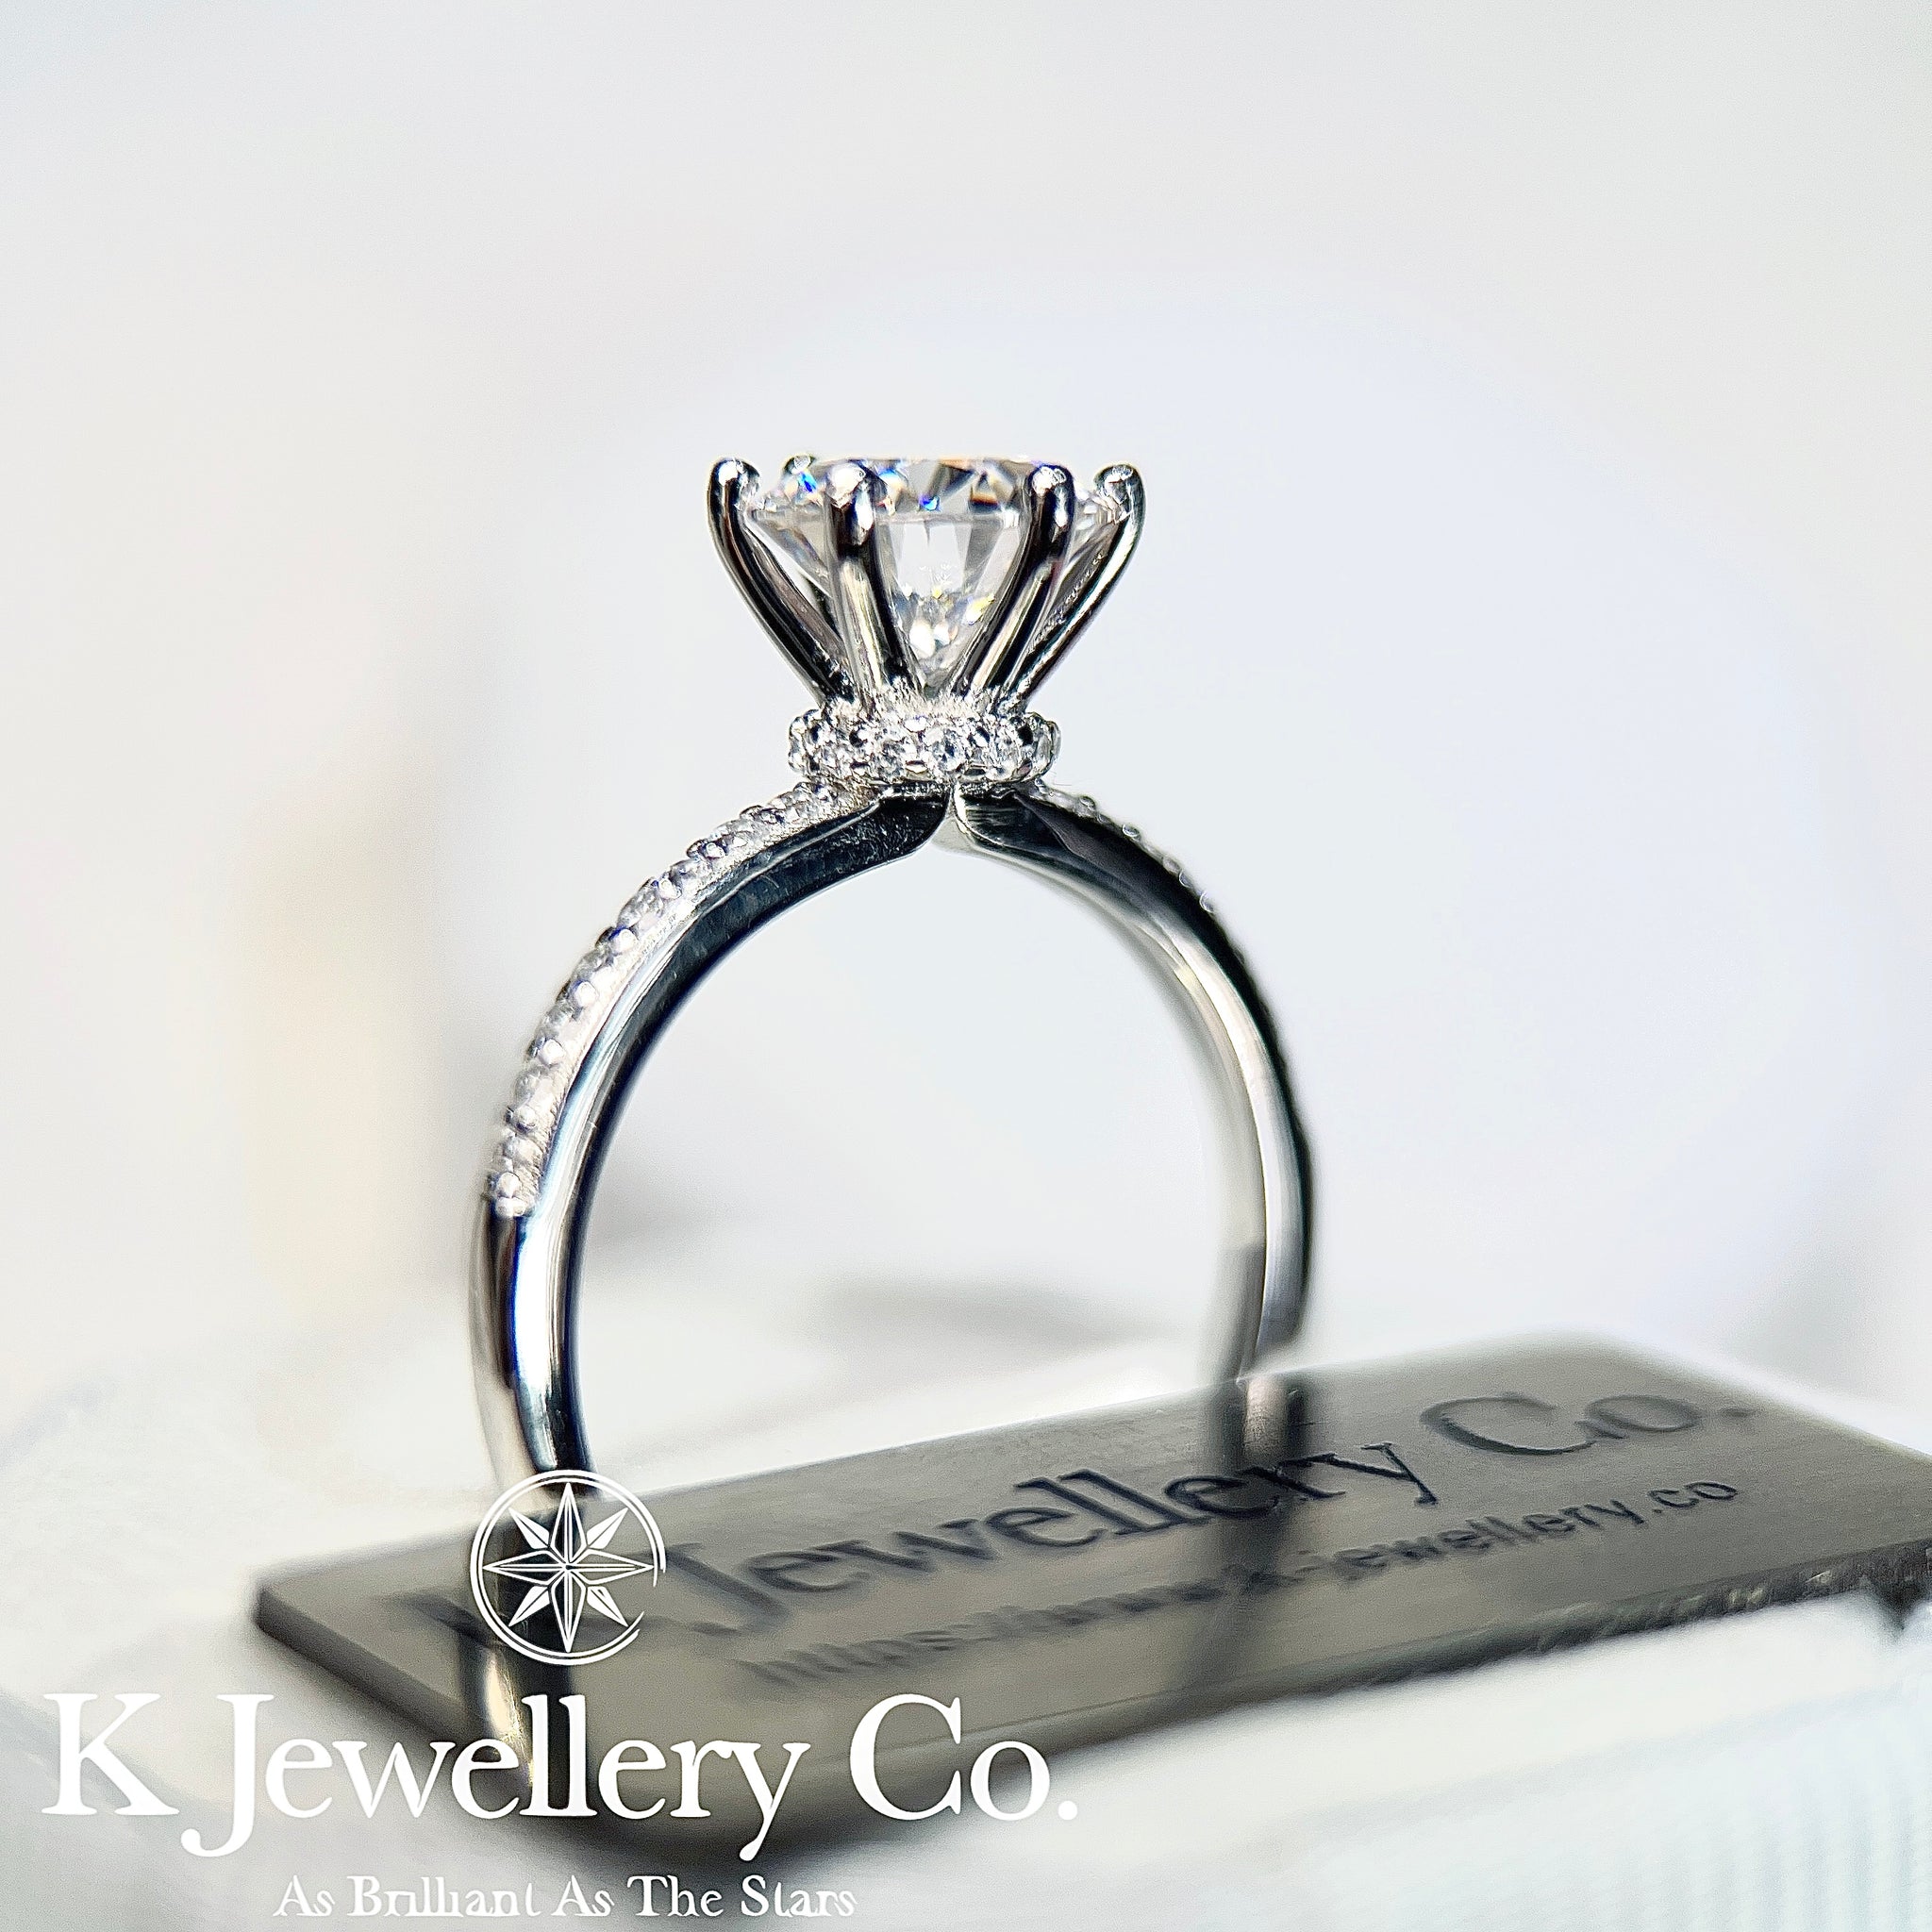 Round Brilliant Cut Solitaire Diamond Engagement Ring, 6 Square Claws Set  on Bead Set Band with Raised Crown Setting.